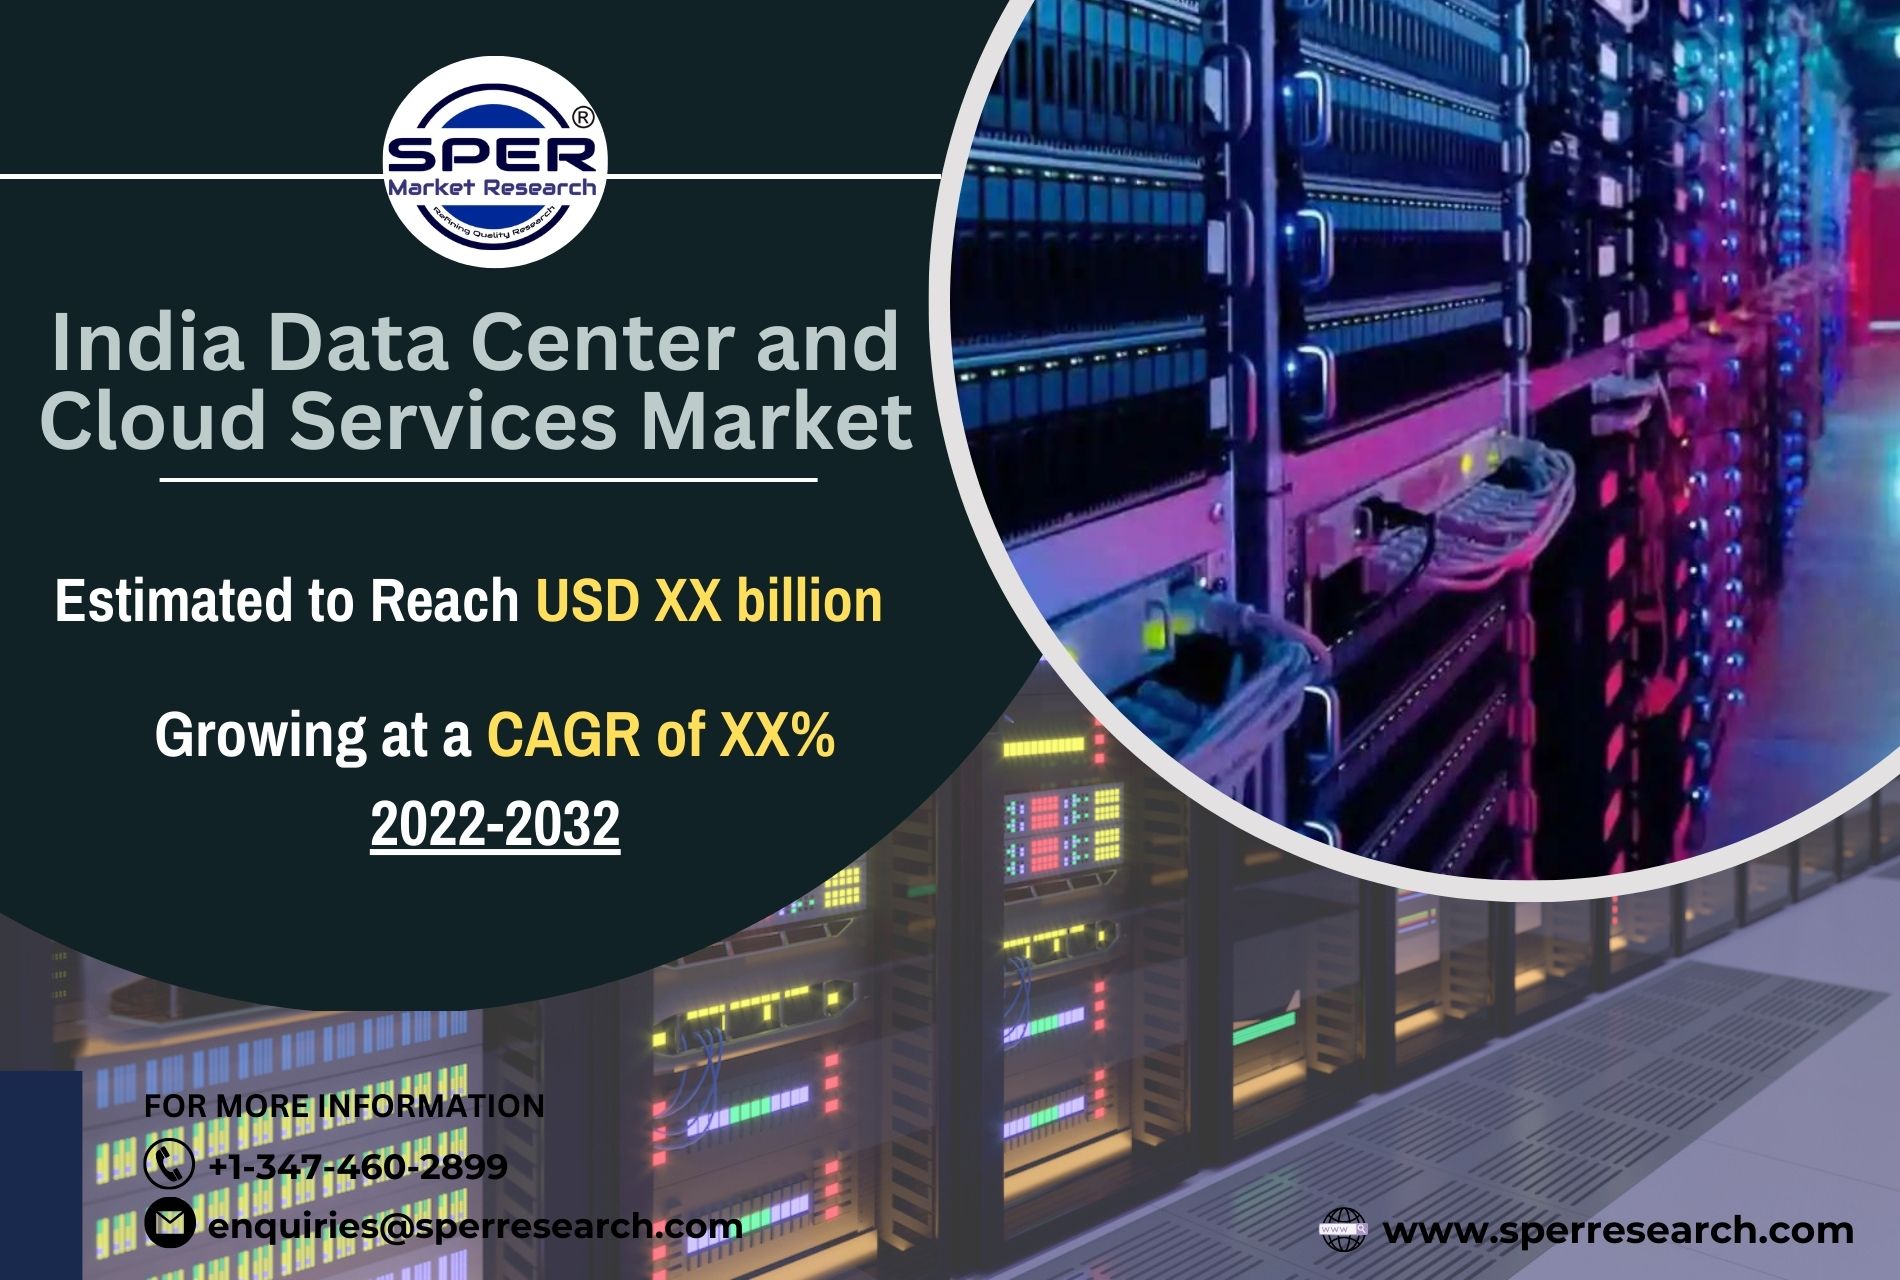 India Data Center and Cloud Services Market